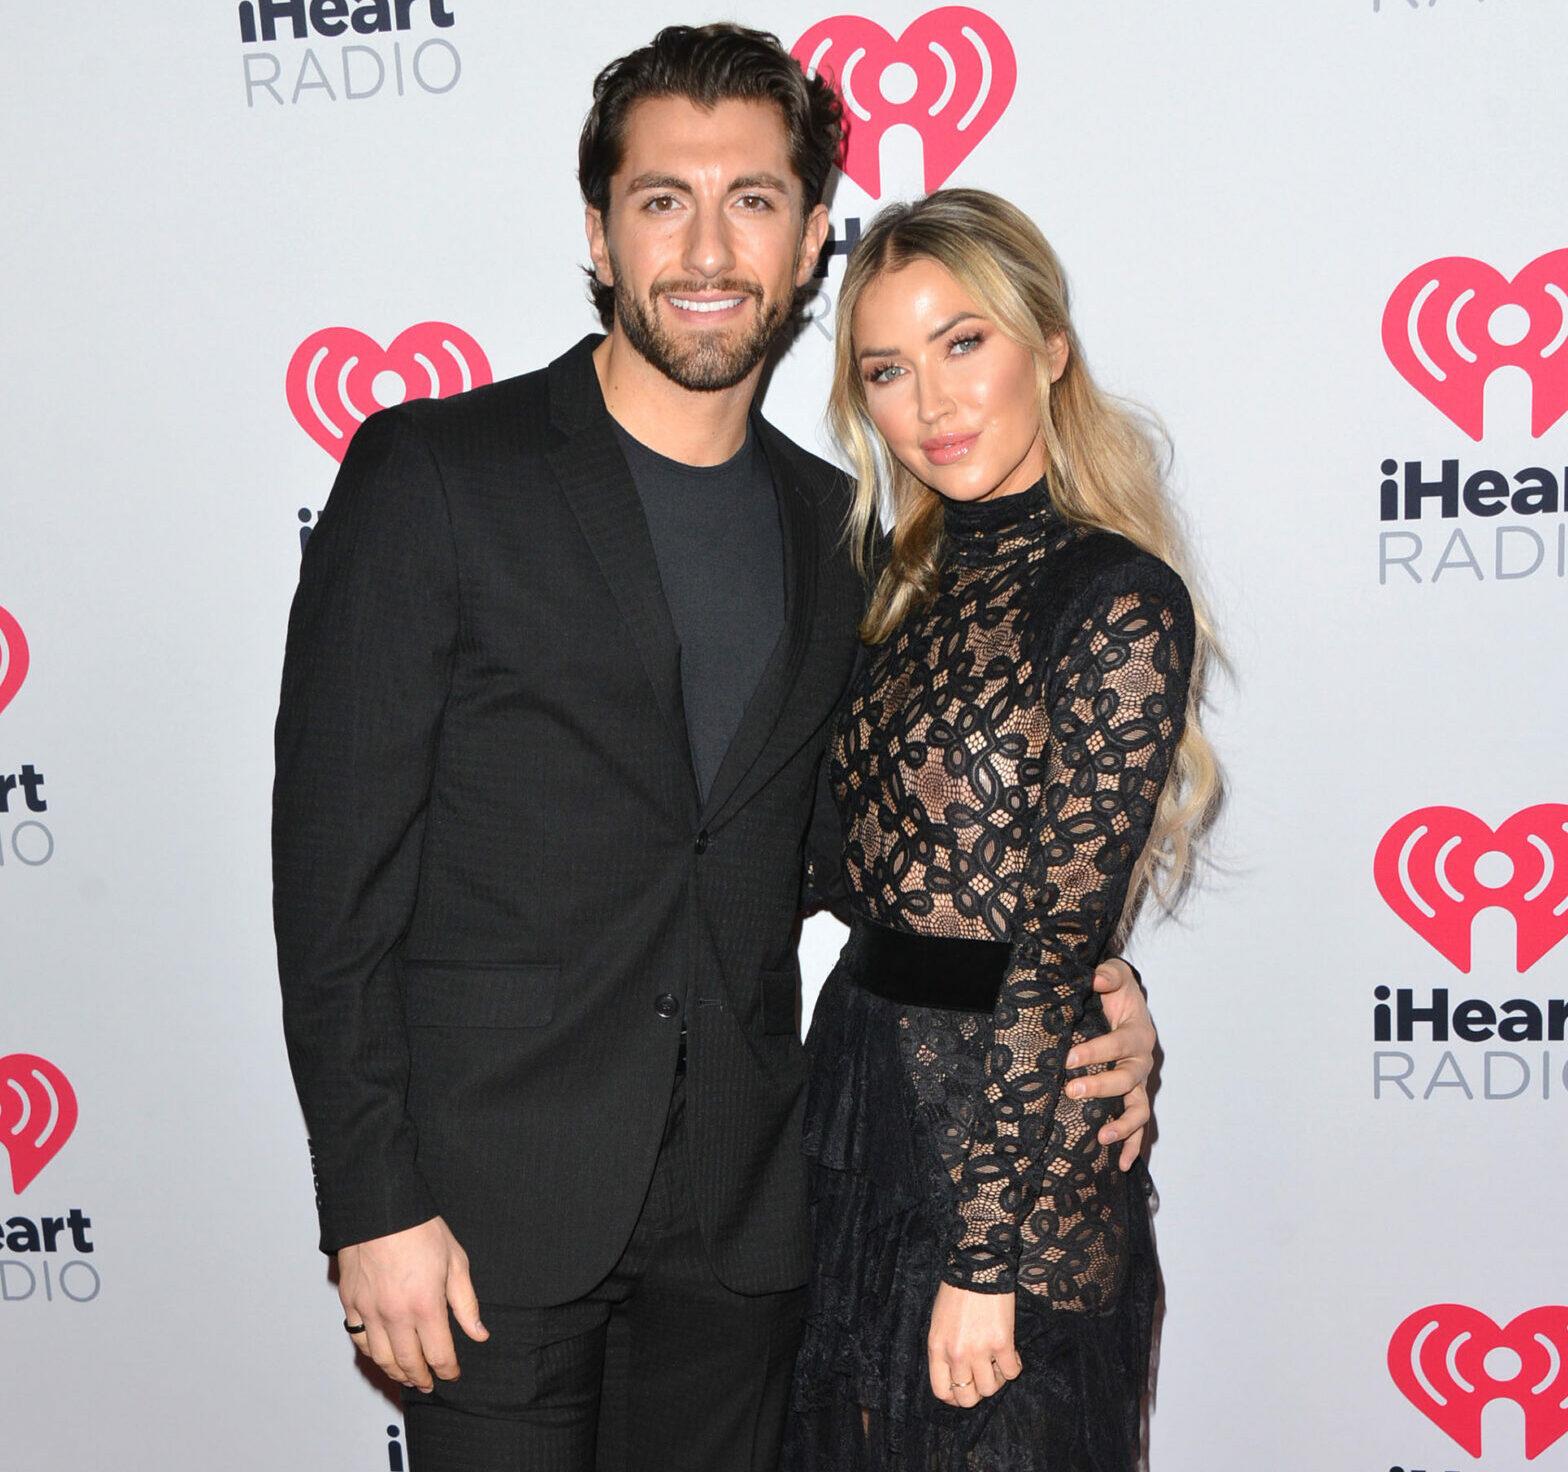 The 2020 iHeartRadio Podcast Awards. 17 Jan 2020 Pictured: Jason Tartick and Kaitlyn Bristowe.